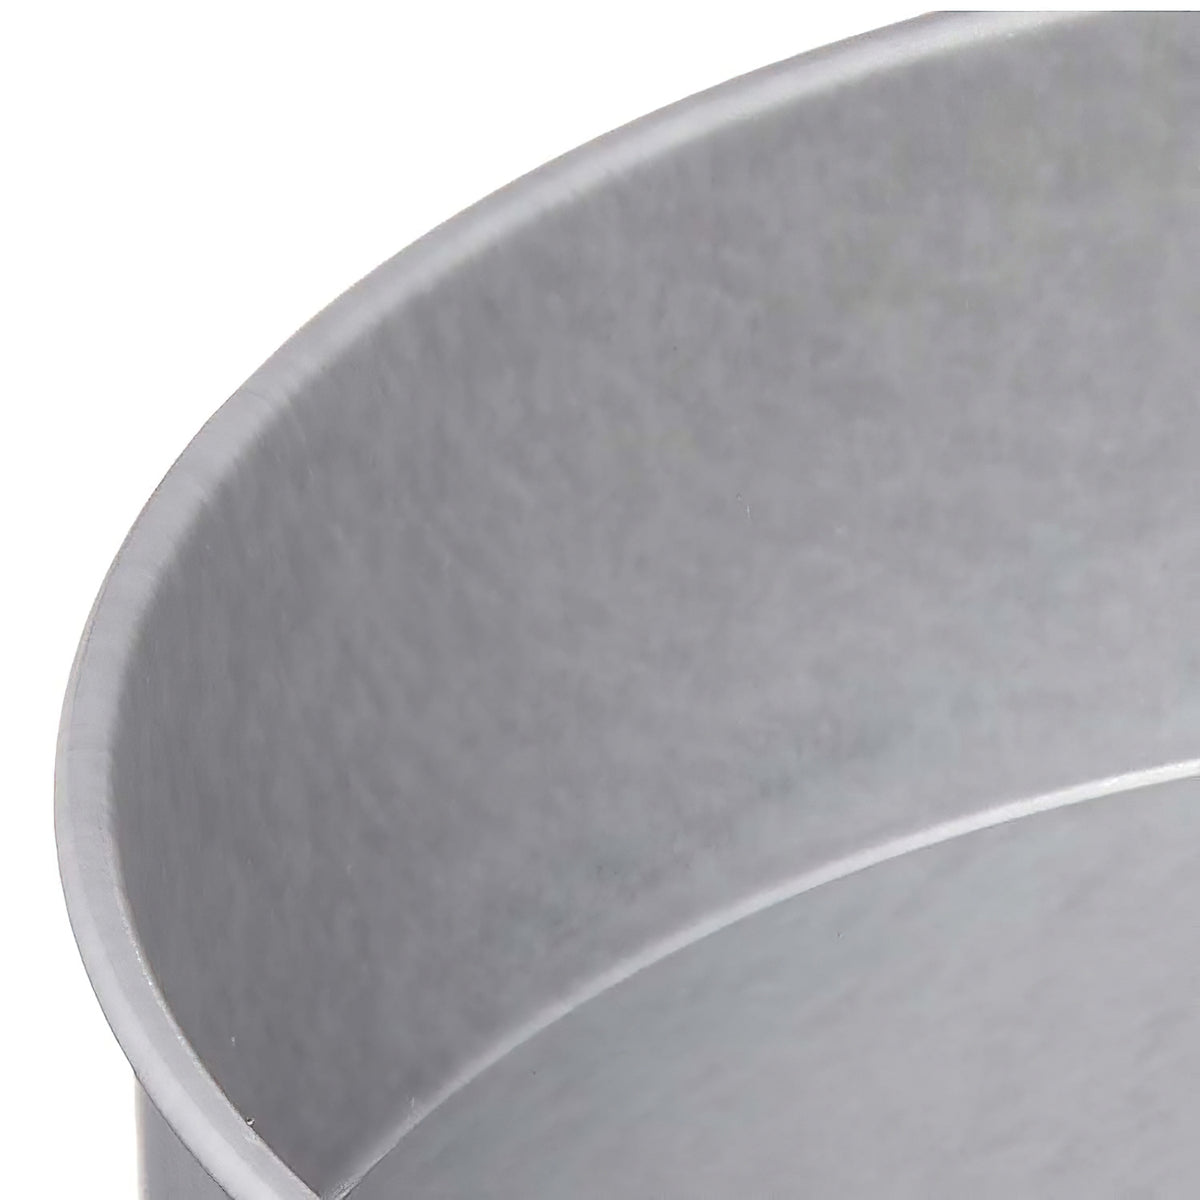 TIGERCROWN Steel Round Cake Pan with Removable Bottom